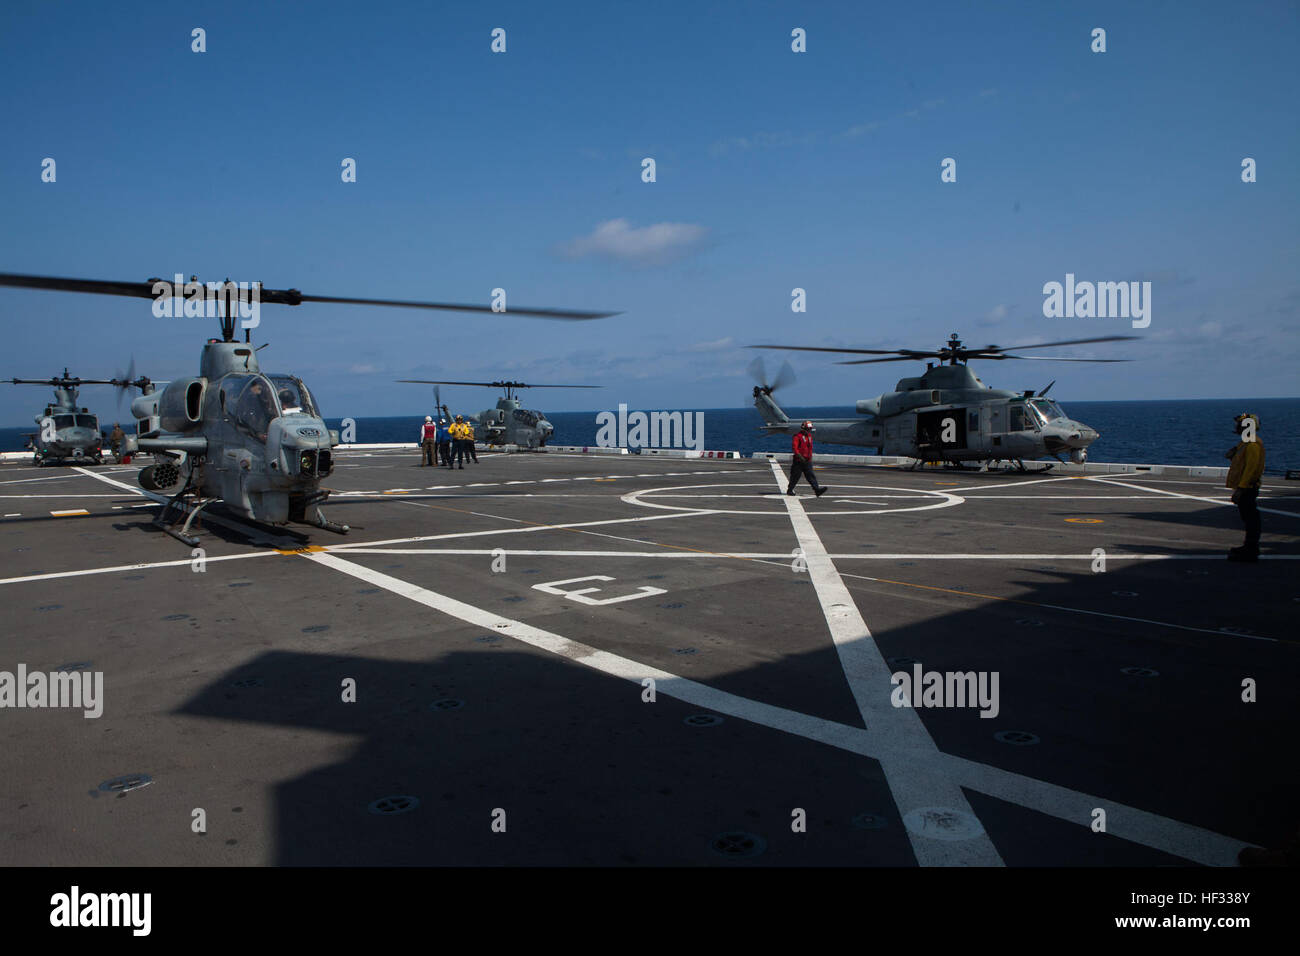 U.S. Marine Corps UH-1Y Hueys and AH-1 Super Cobras assigned to Marine Medium Tiltrotor Squadron 262 (Reinforced), 31st Marine Expeditionary Unit (MEU), prepare to take off from the flight deck of the USS Green Bay (LPD 20) while out at sea, March 11, 2015. The 31st MEU is currently conducting its Spring Patrol of the Asia-Pacific region. (U.S. Marine Corps photo by GySgt Ismael Pena/Released) VMM 262 (Rein) aboard the USS Green Bay 150314-M-CX588-034 Stock Photo